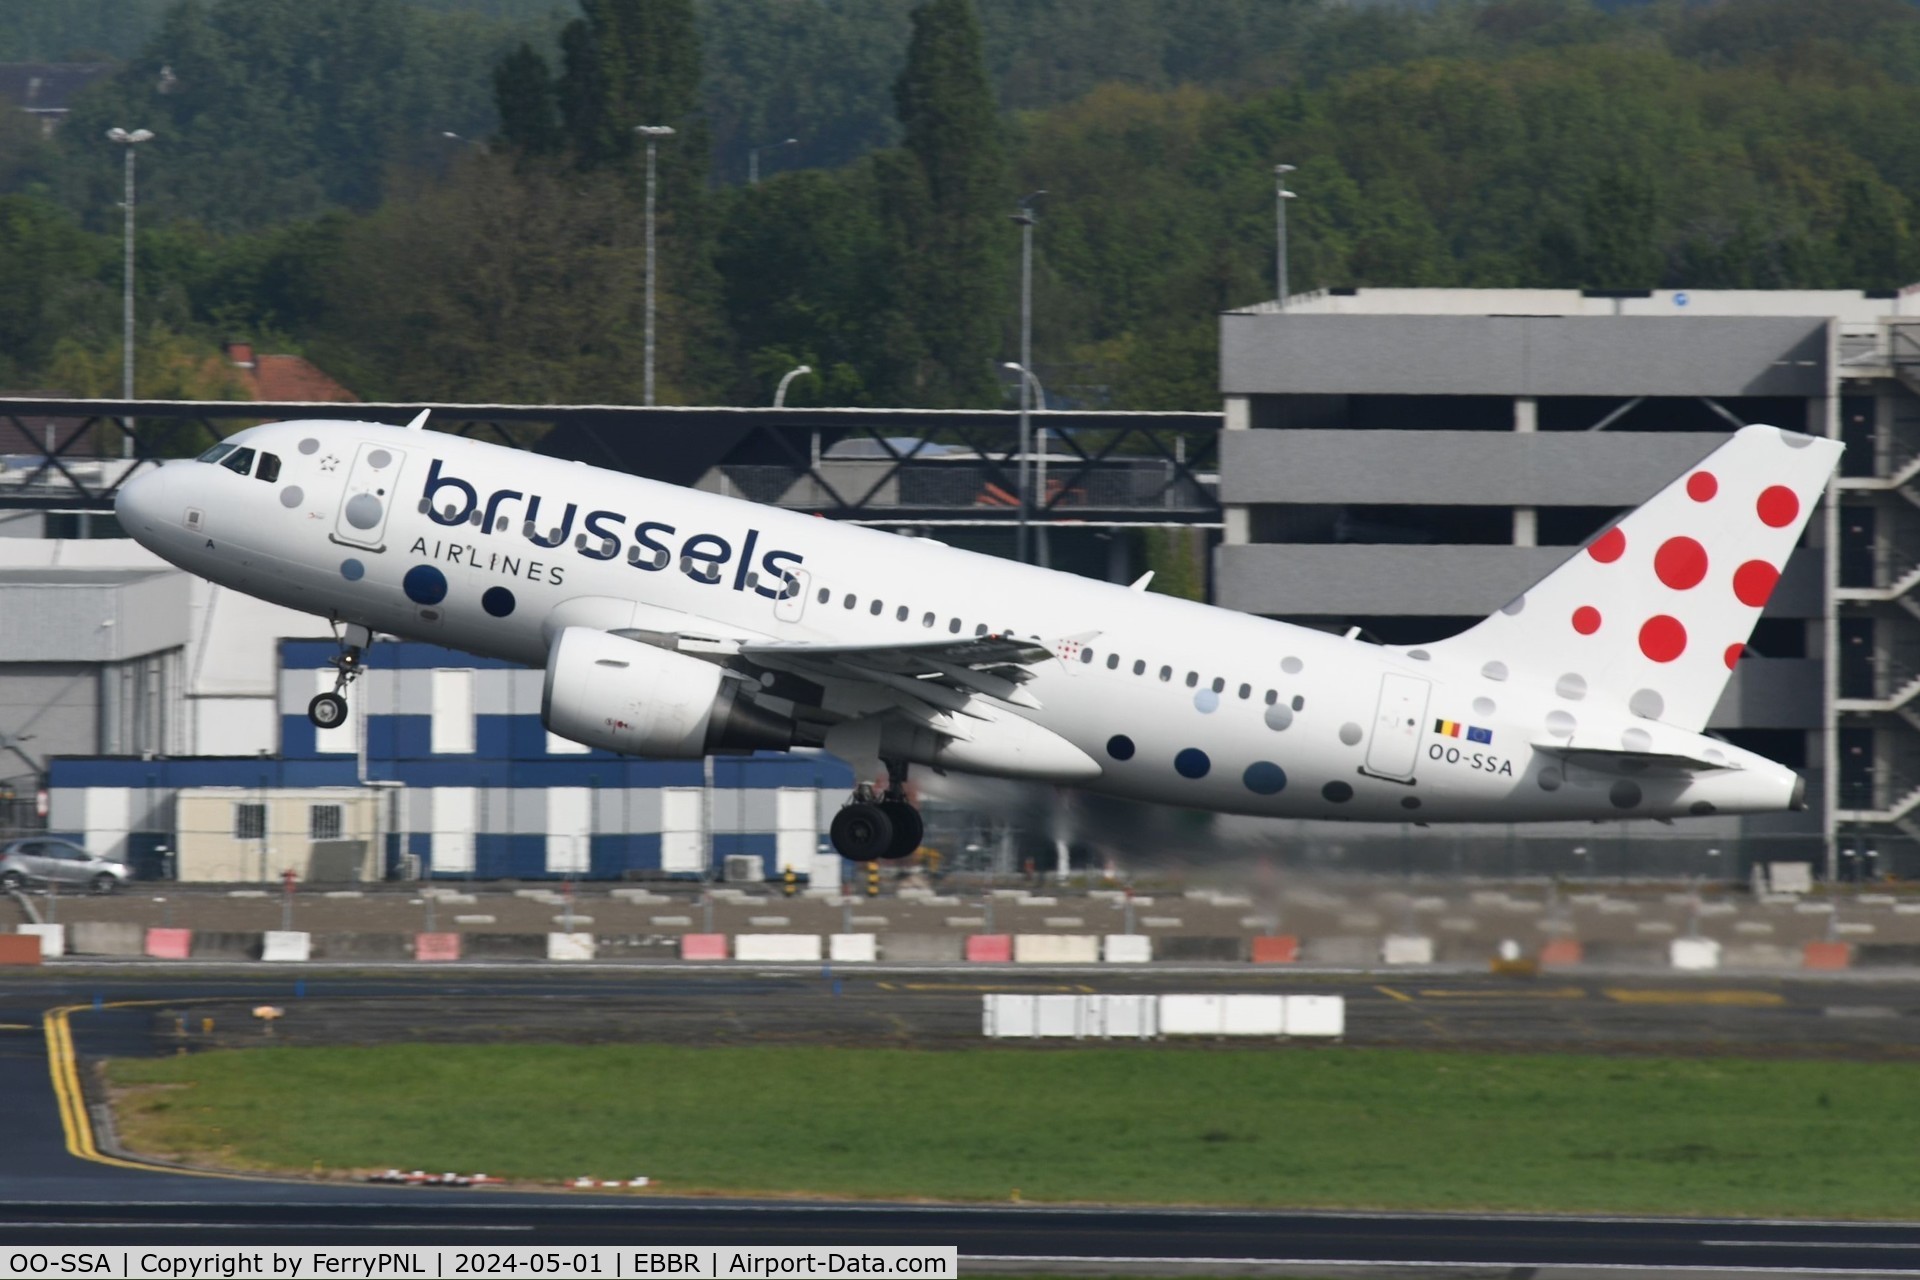 OO-SSA, 2005 Airbus A319-111 C/N 2392, Brussels A319 taking-off